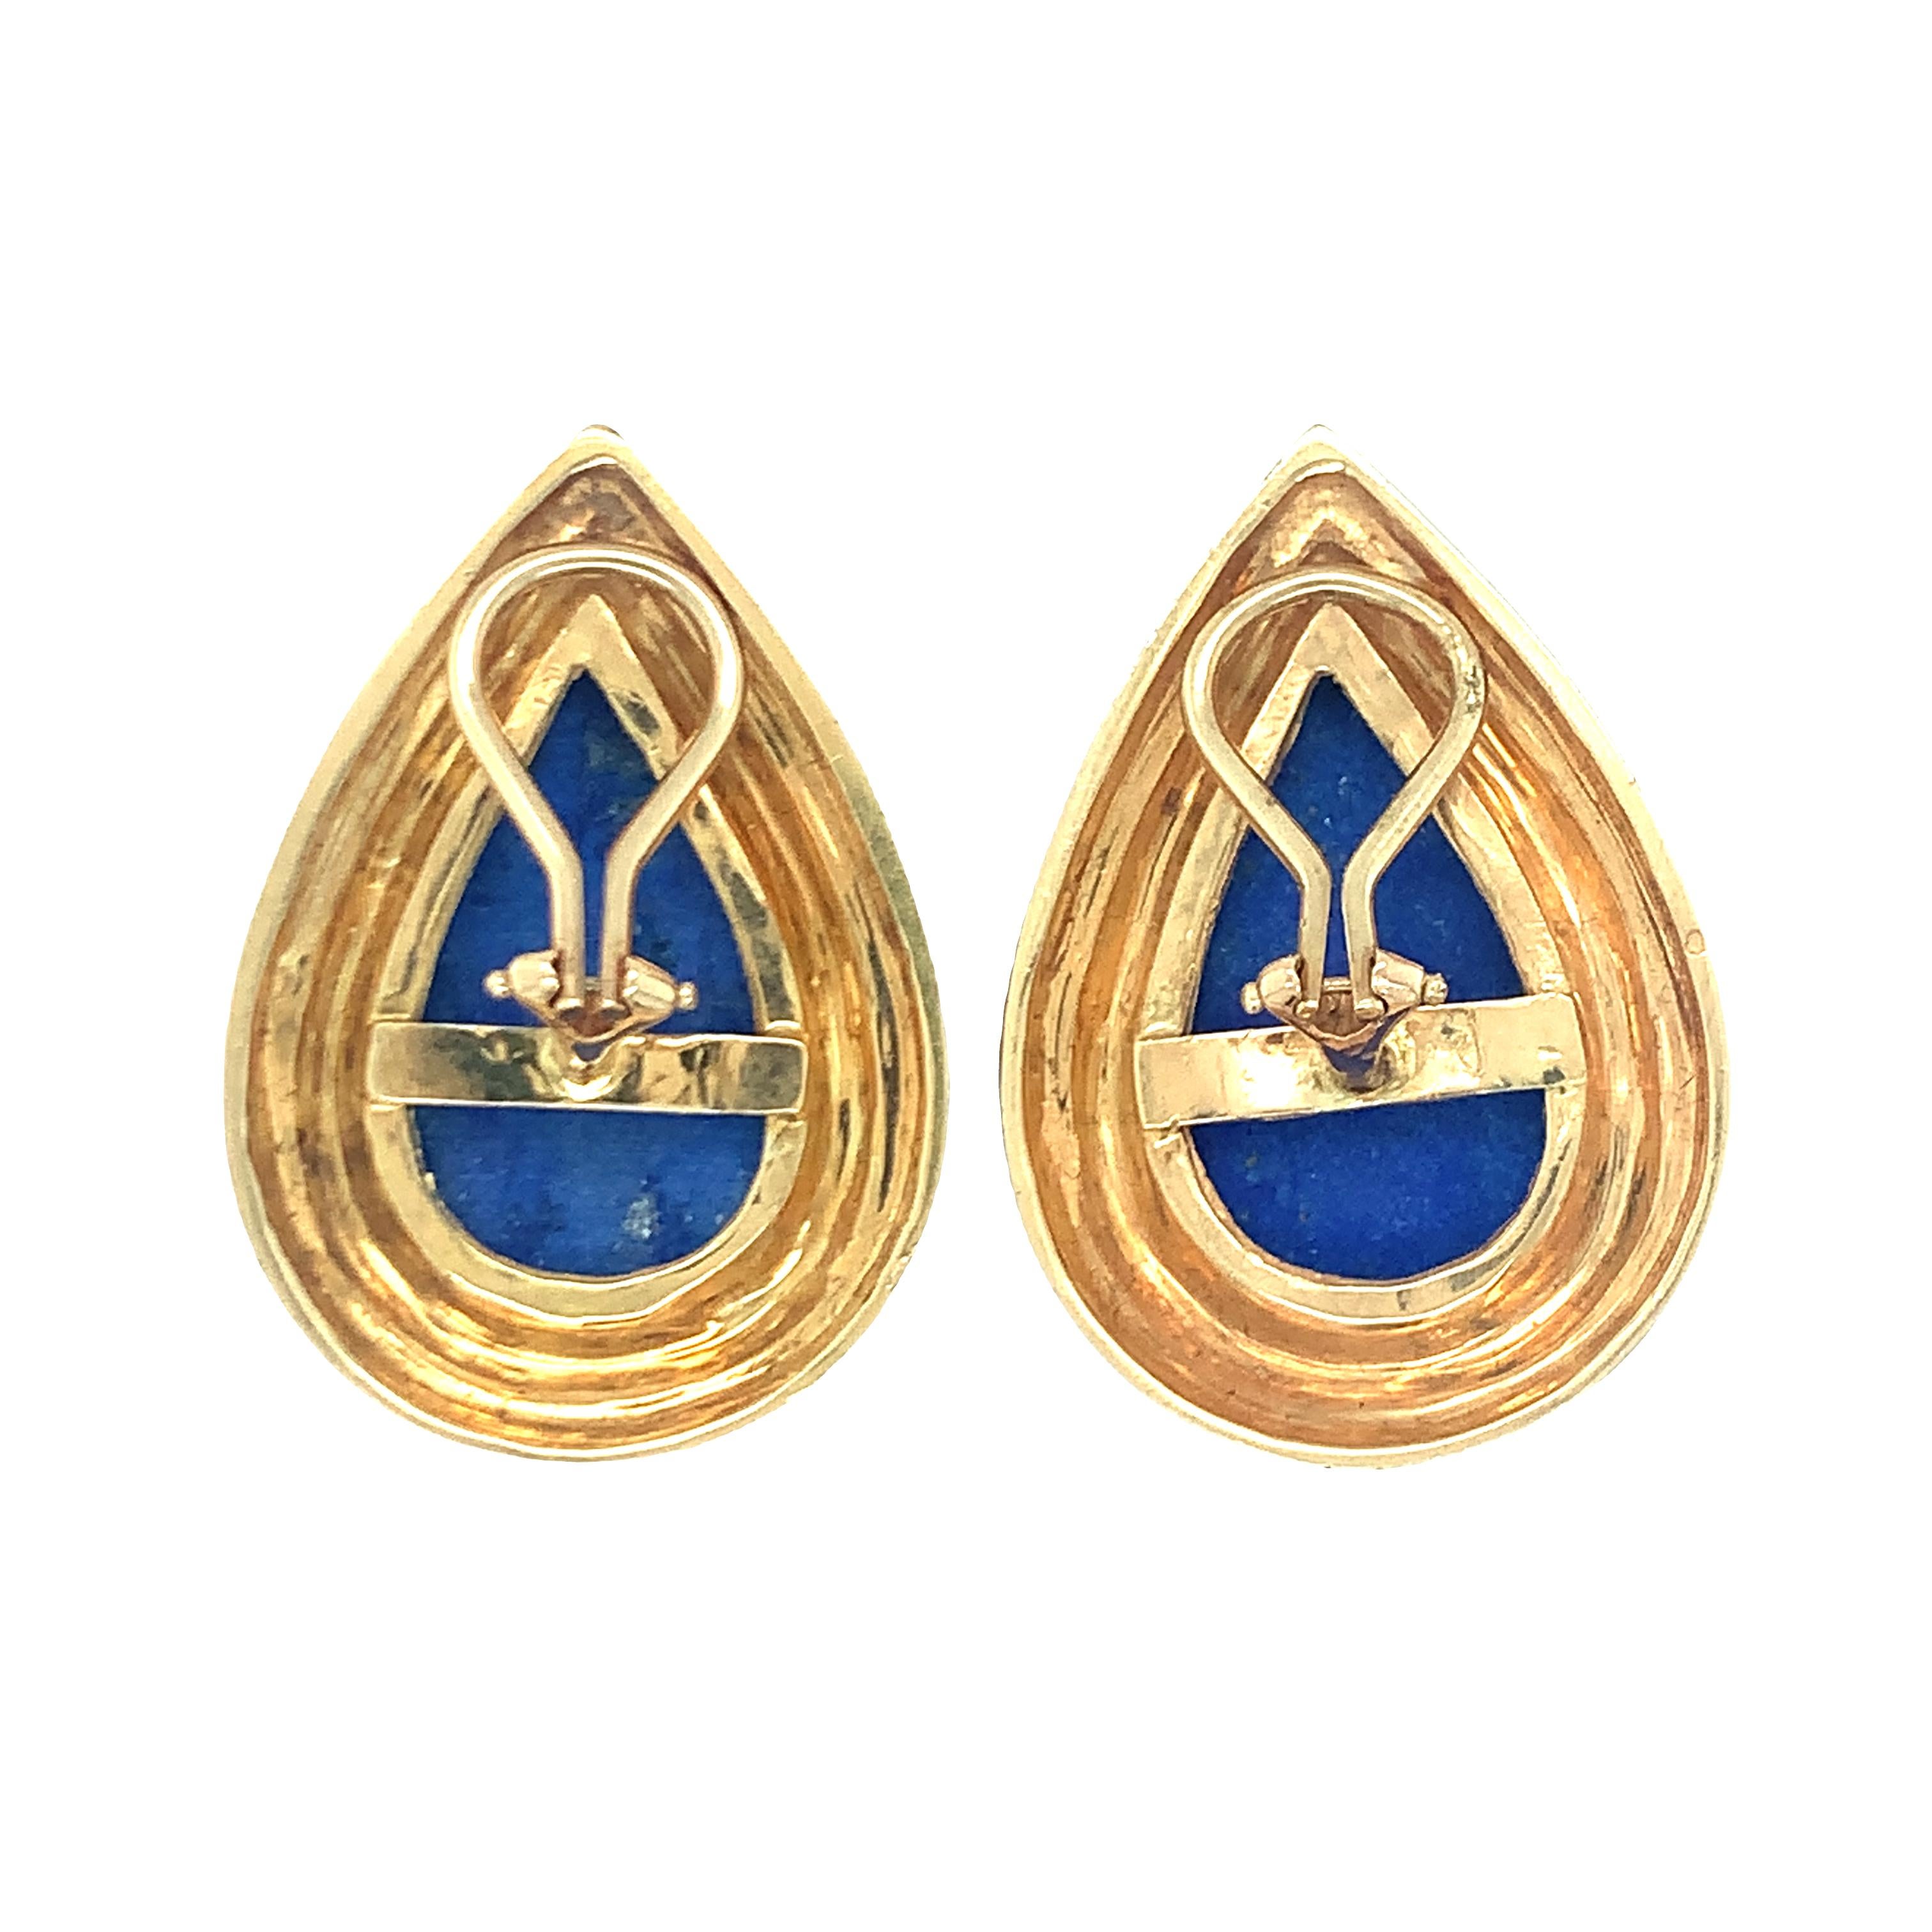 One pair of pear-shaped lapis lazuli 18K yellow gold earrings featuring royal blue lapis stone smeasuirng 24 x 15 mm. each in size. With a textured gold border, posts and Omega backs. Circa 1960s.

Regal, cobalt, lovely.

Metal: 18K yellow